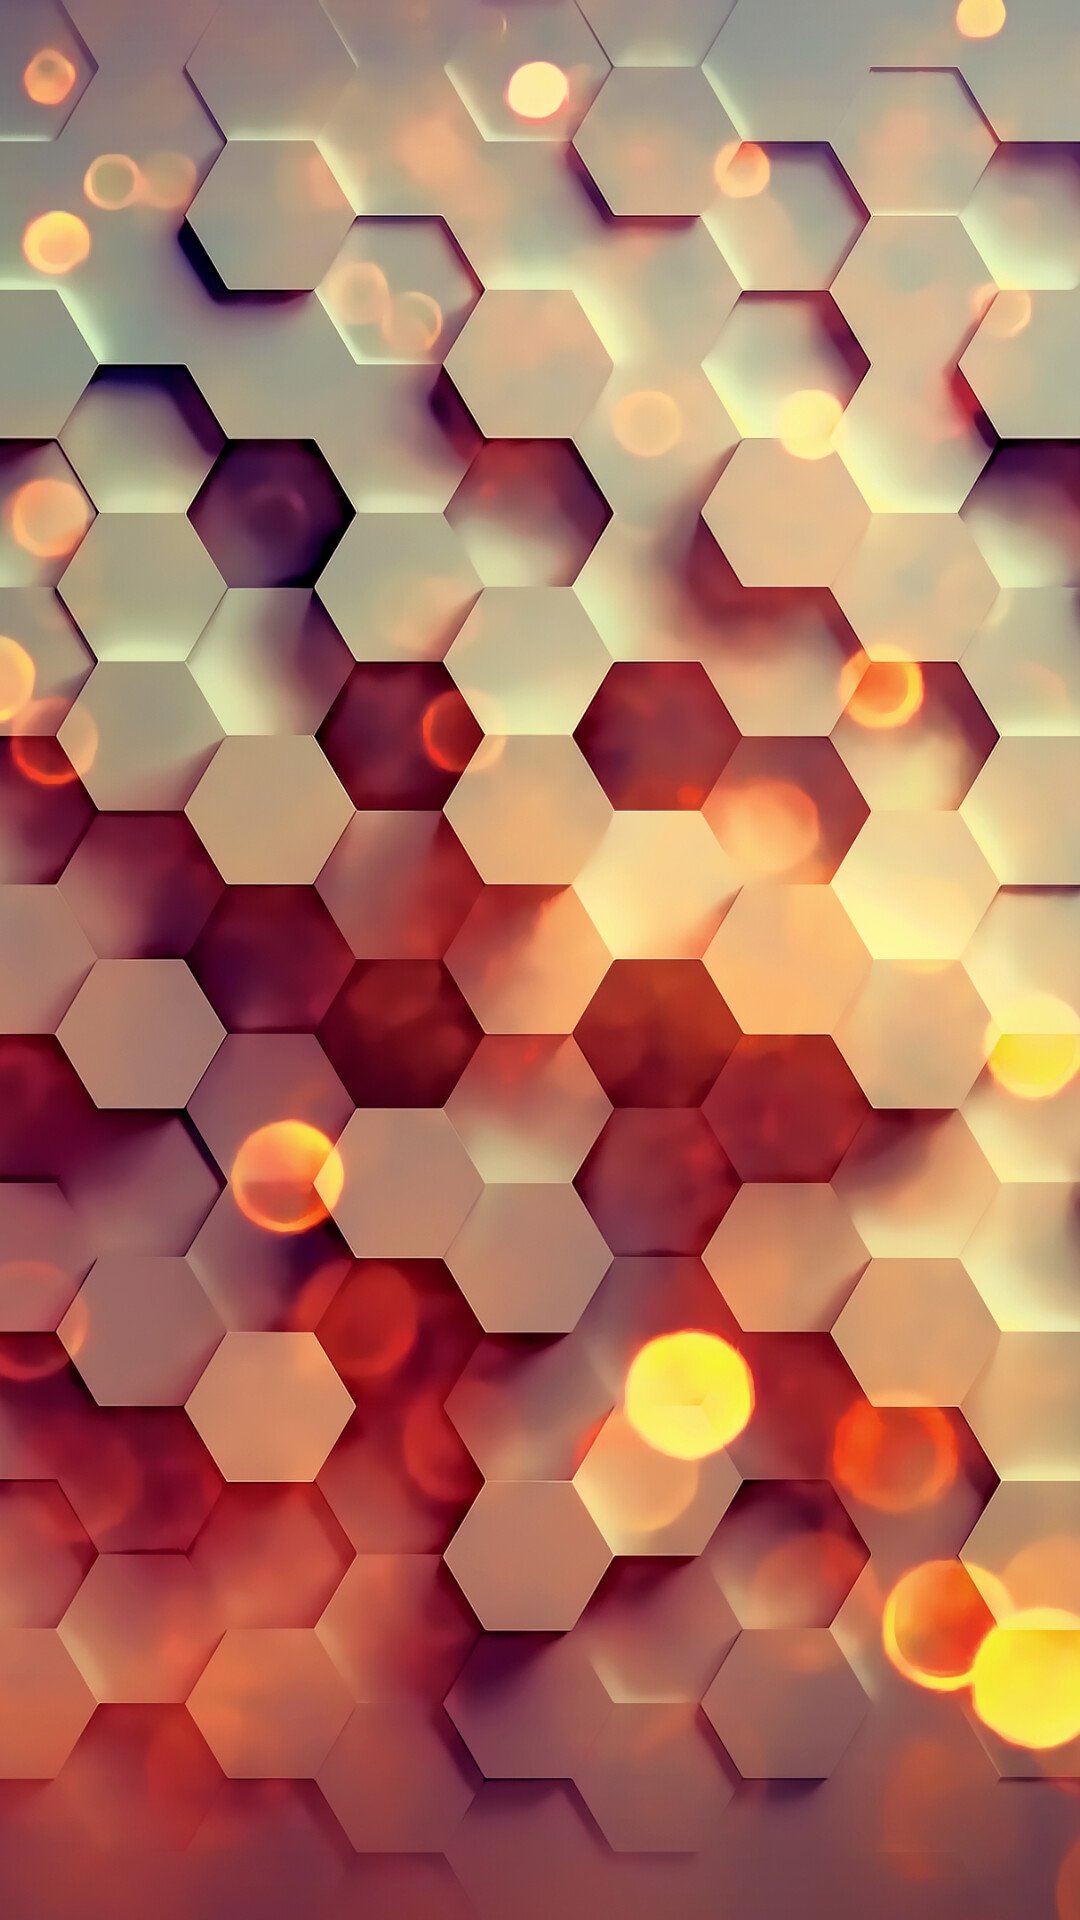 Geometry: Hexagons, Obtuse angles, Circles of light. 1080x1920 Full HD Background.